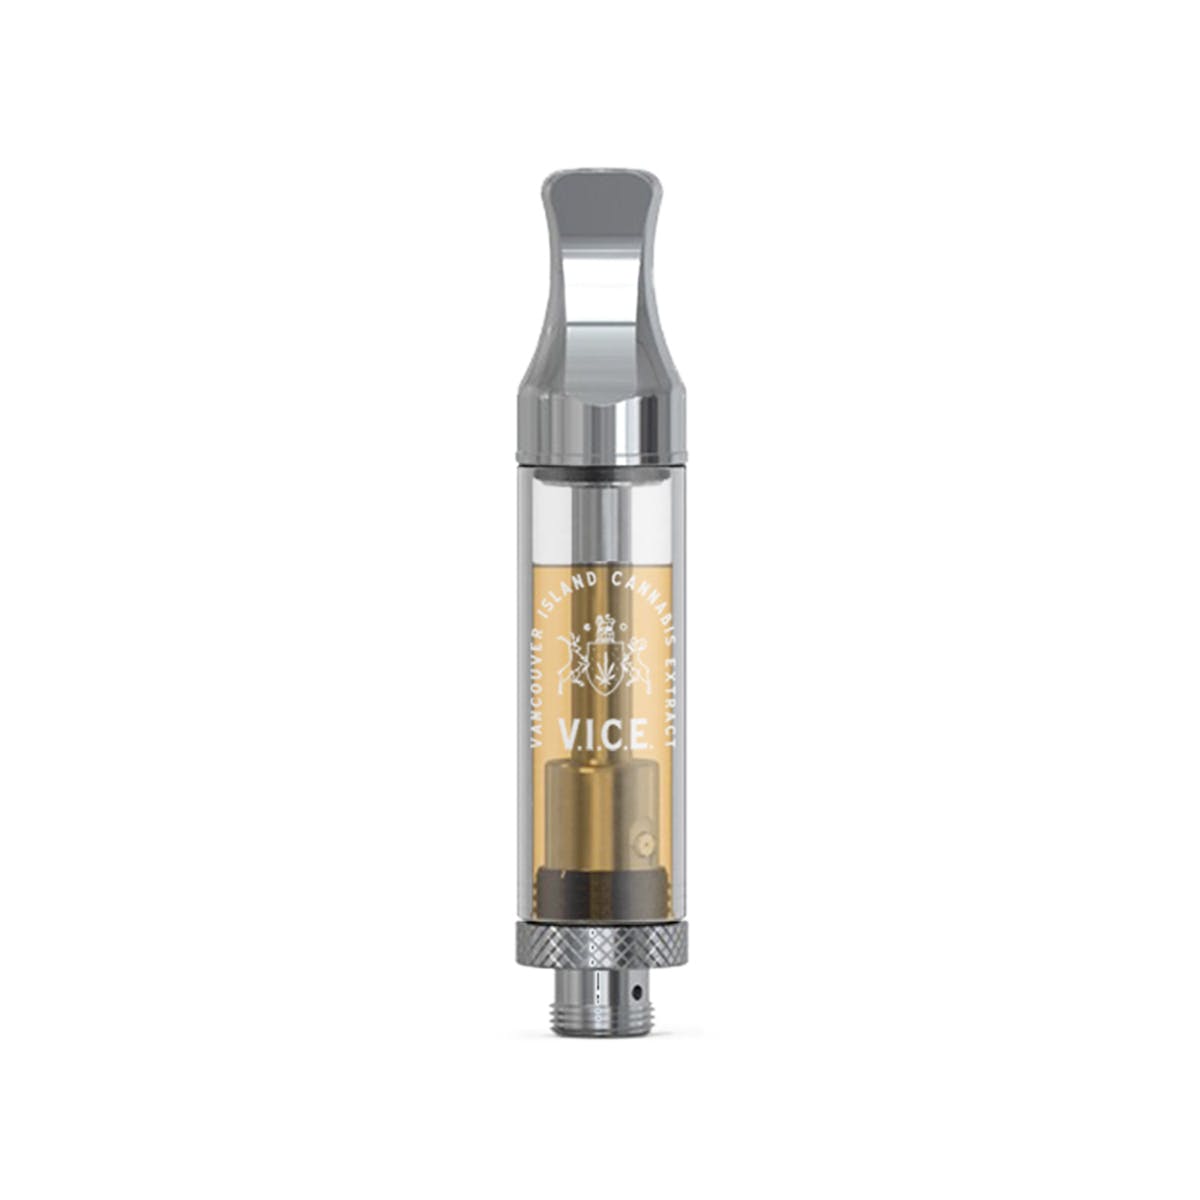 concentrate-vice-vancouver-island-cannabis-extracts-bc-kush-pre-filled-cartridge